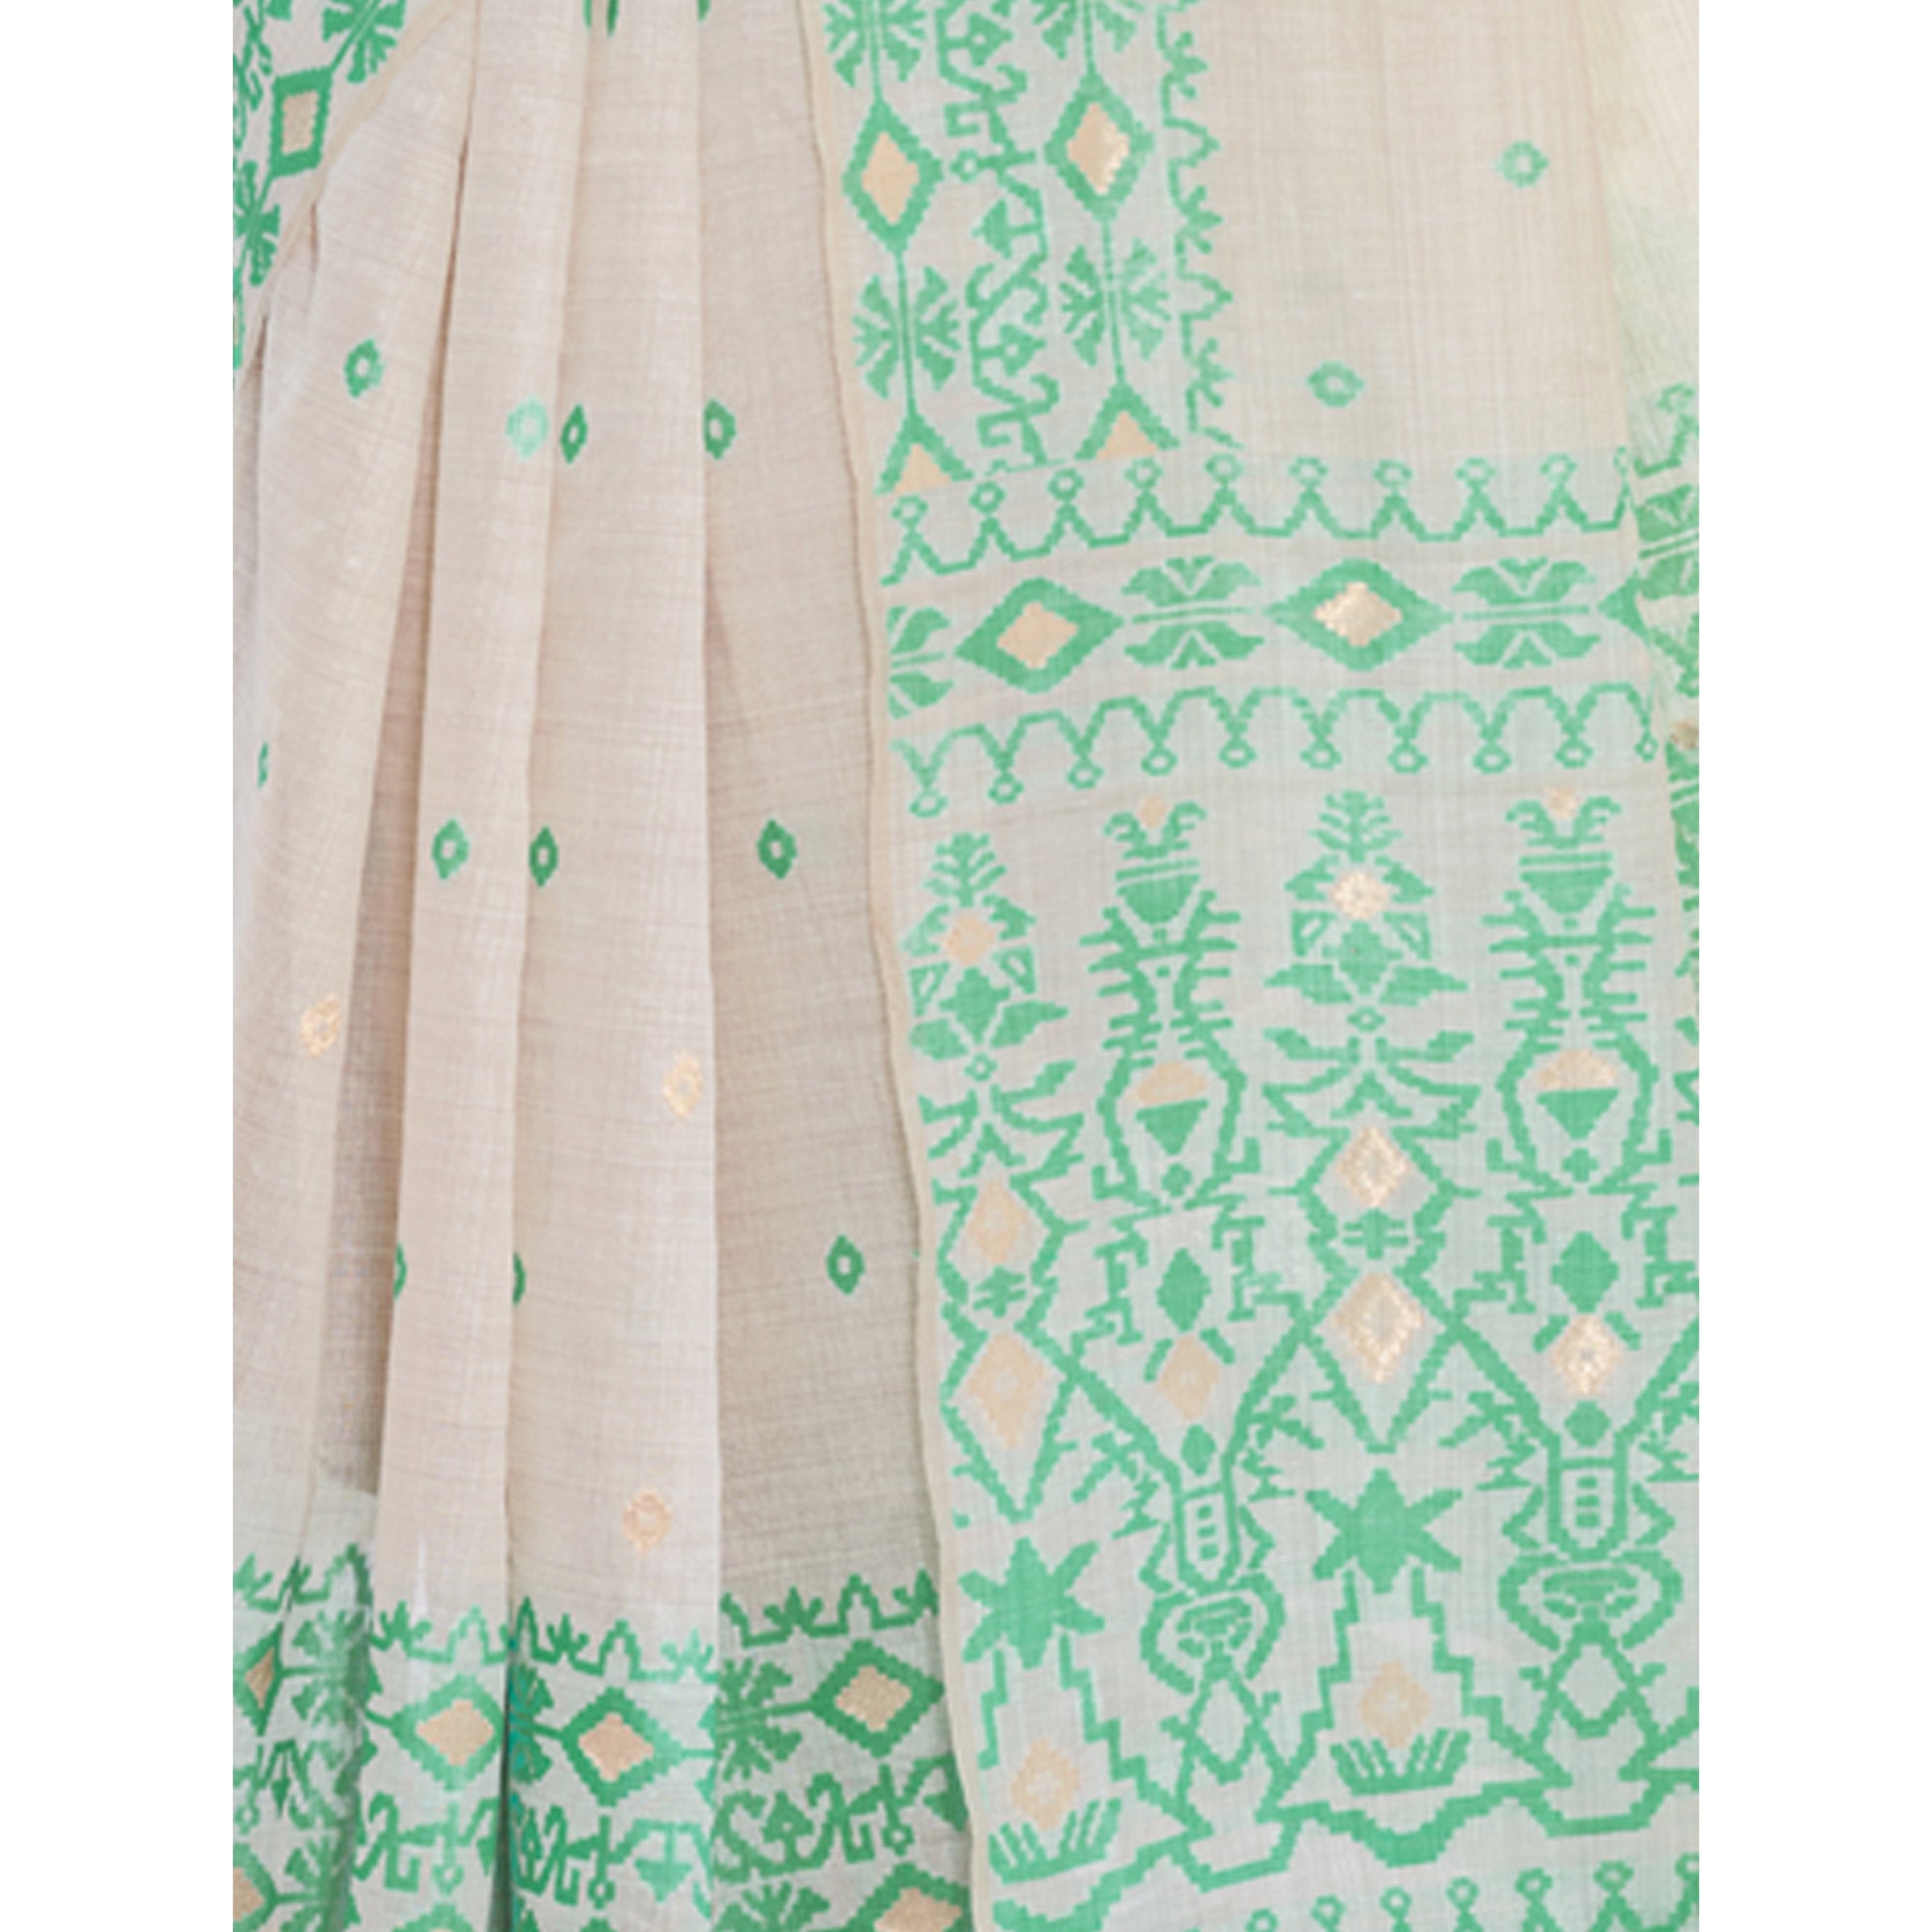 Off White & Green Woven Cotton Silk Saree With Tassels